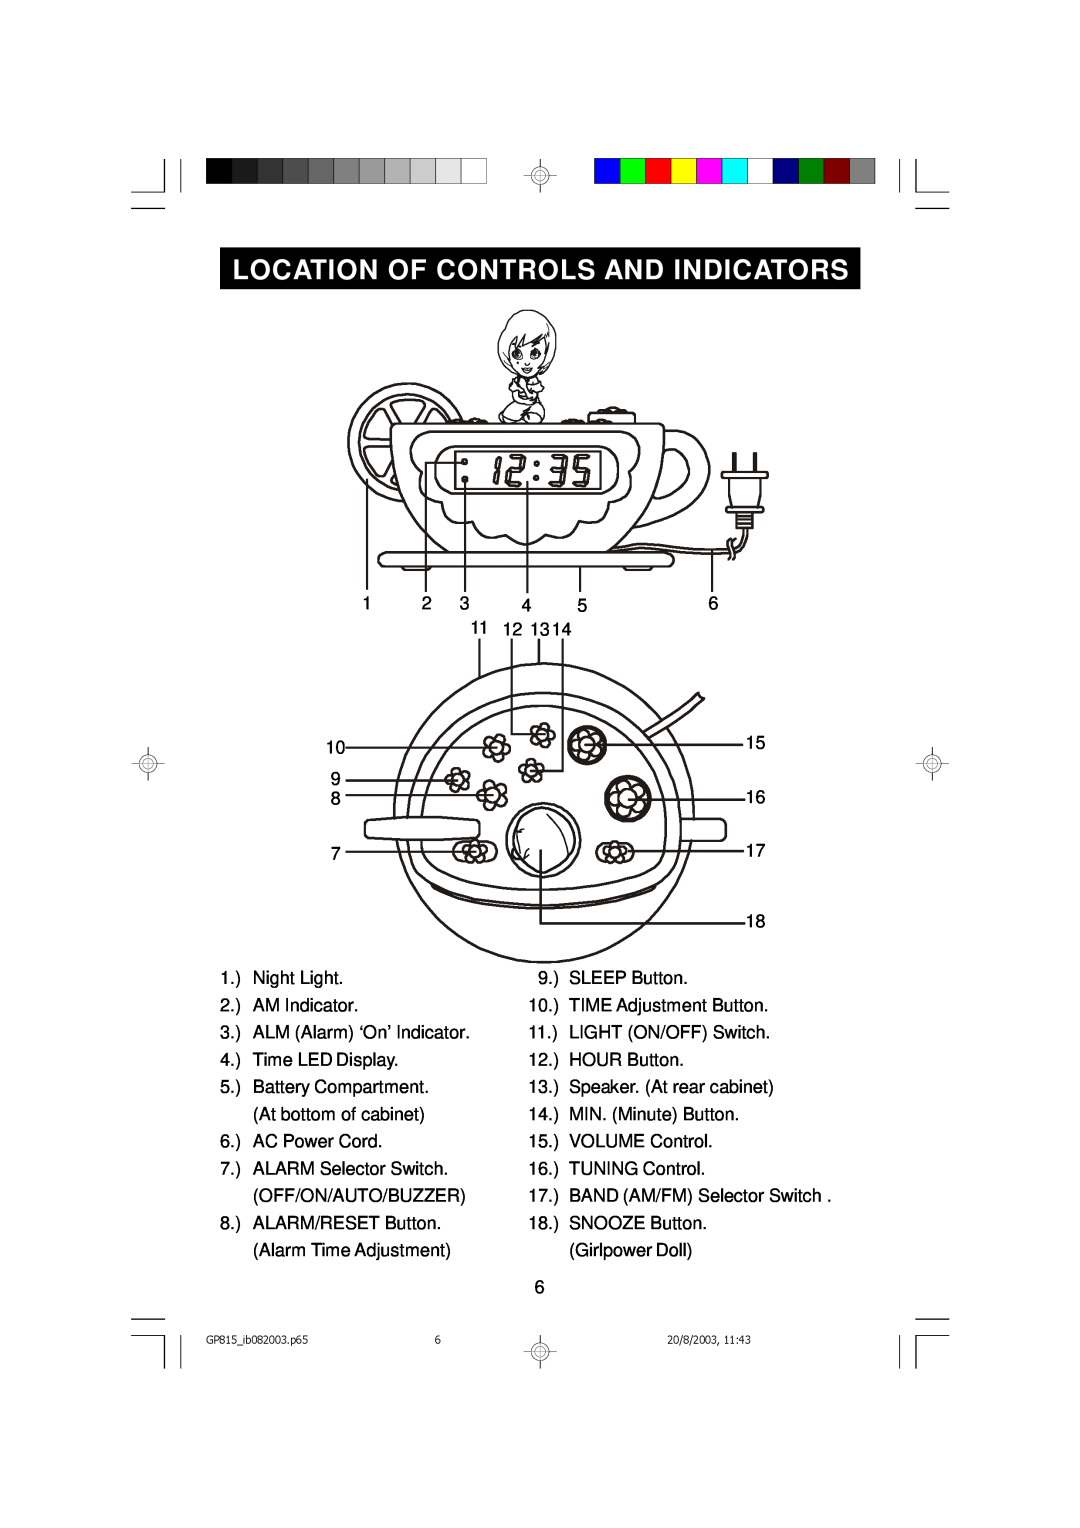 Emerson GP815 owner manual Location Of Controls And Indicators 